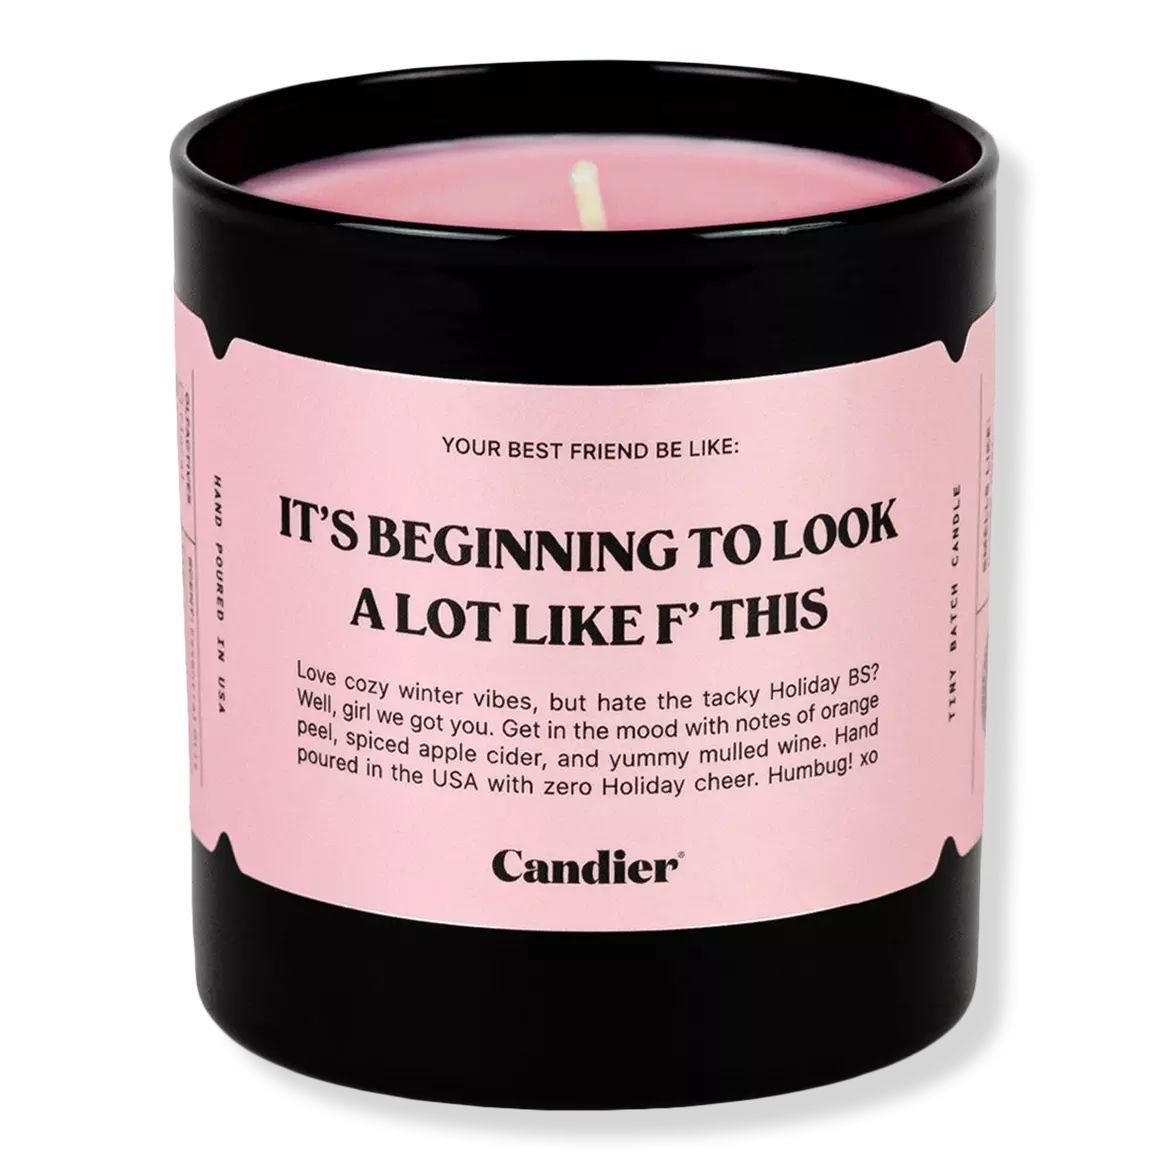 It's Beginning to Look A Lot Like F This Candle | Ulta